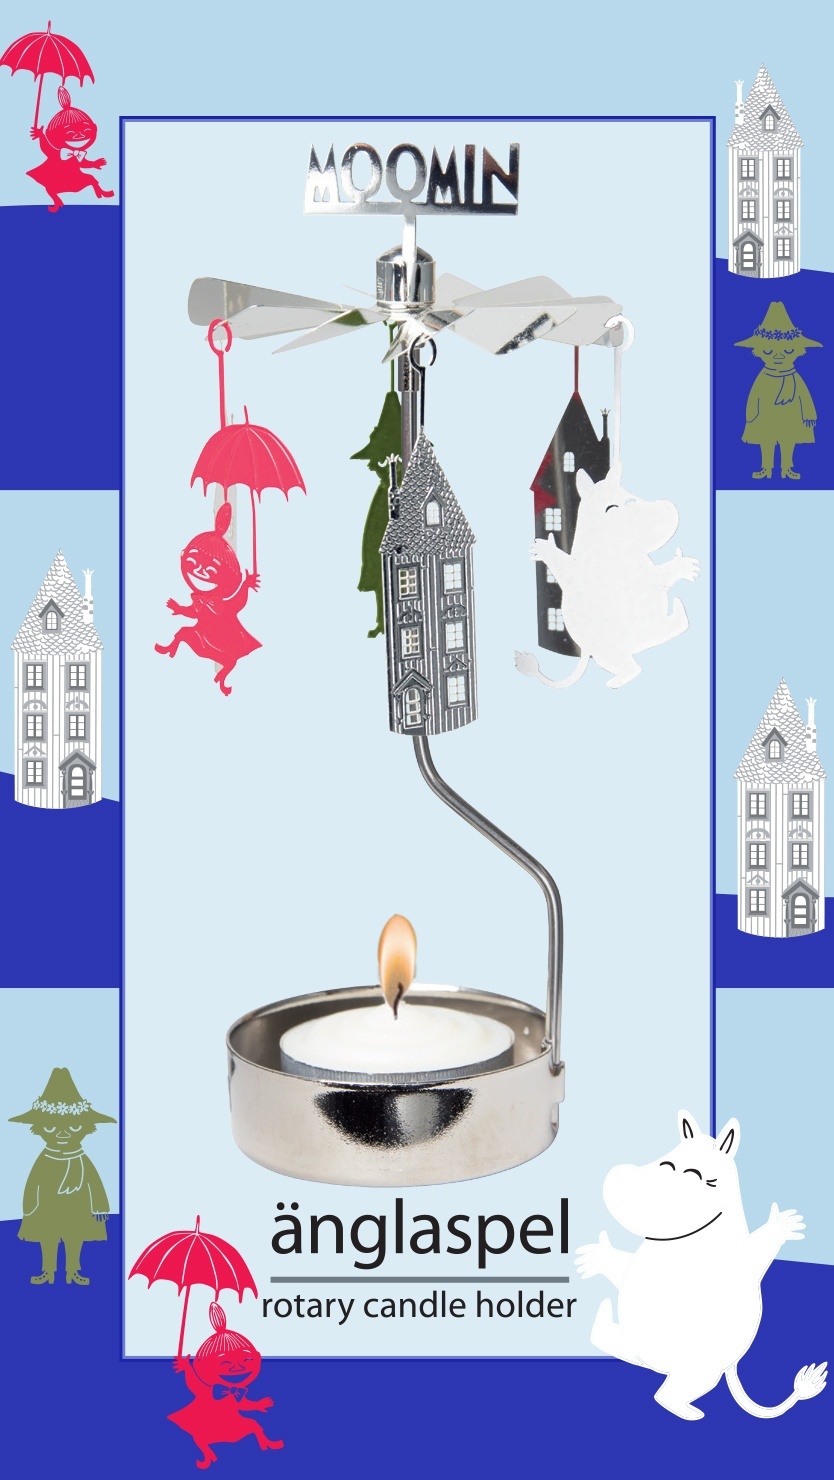 Pluto Rotary Candle Holder Moomin Friends & House